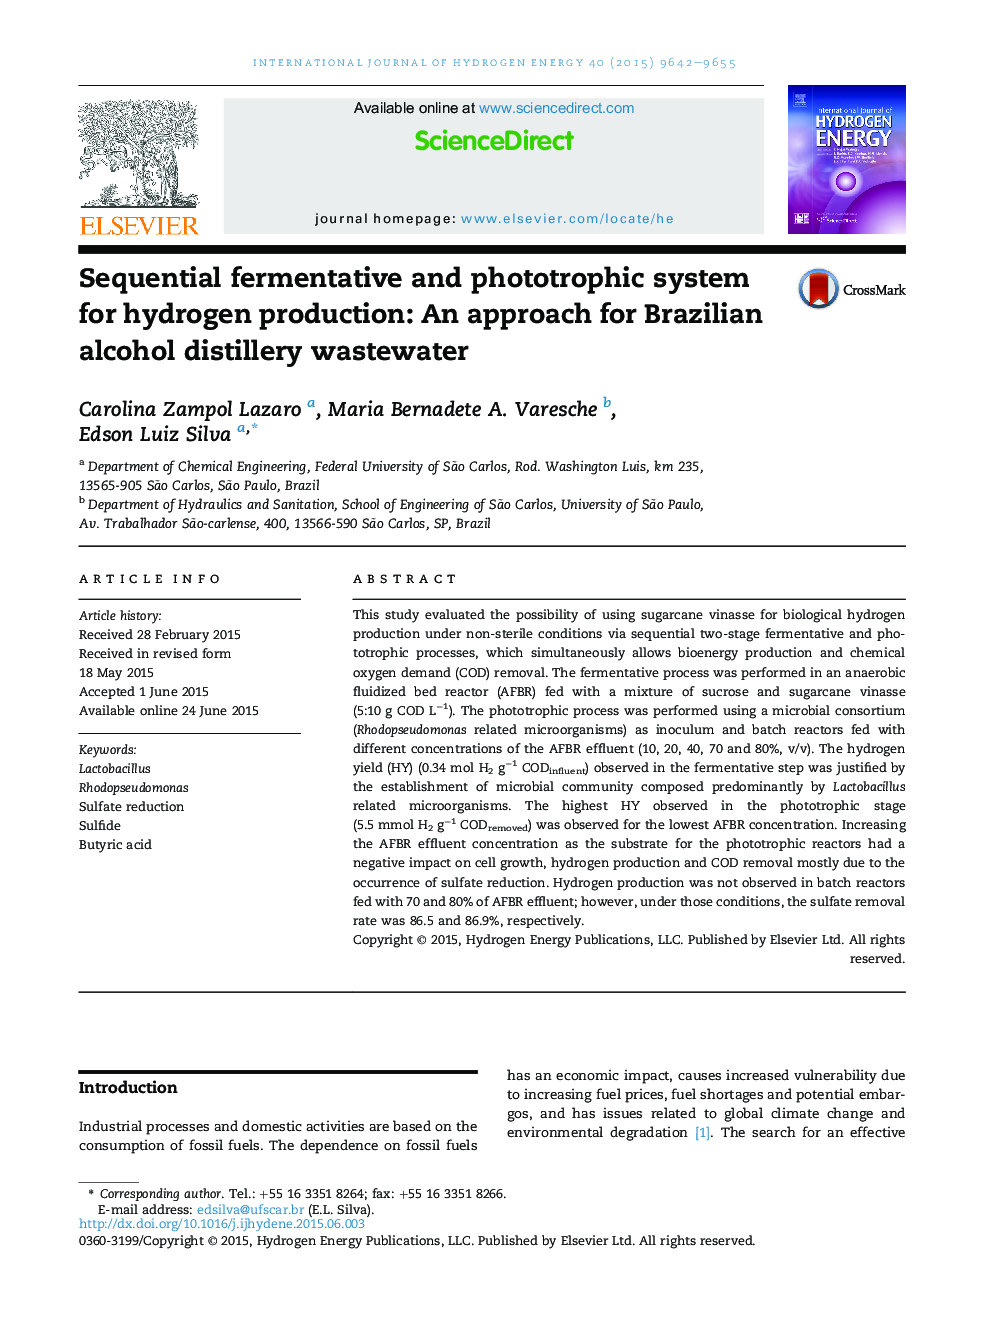 Sequential fermentative and phototrophic system for hydrogen production: An approach for Brazilian alcohol distillery wastewater